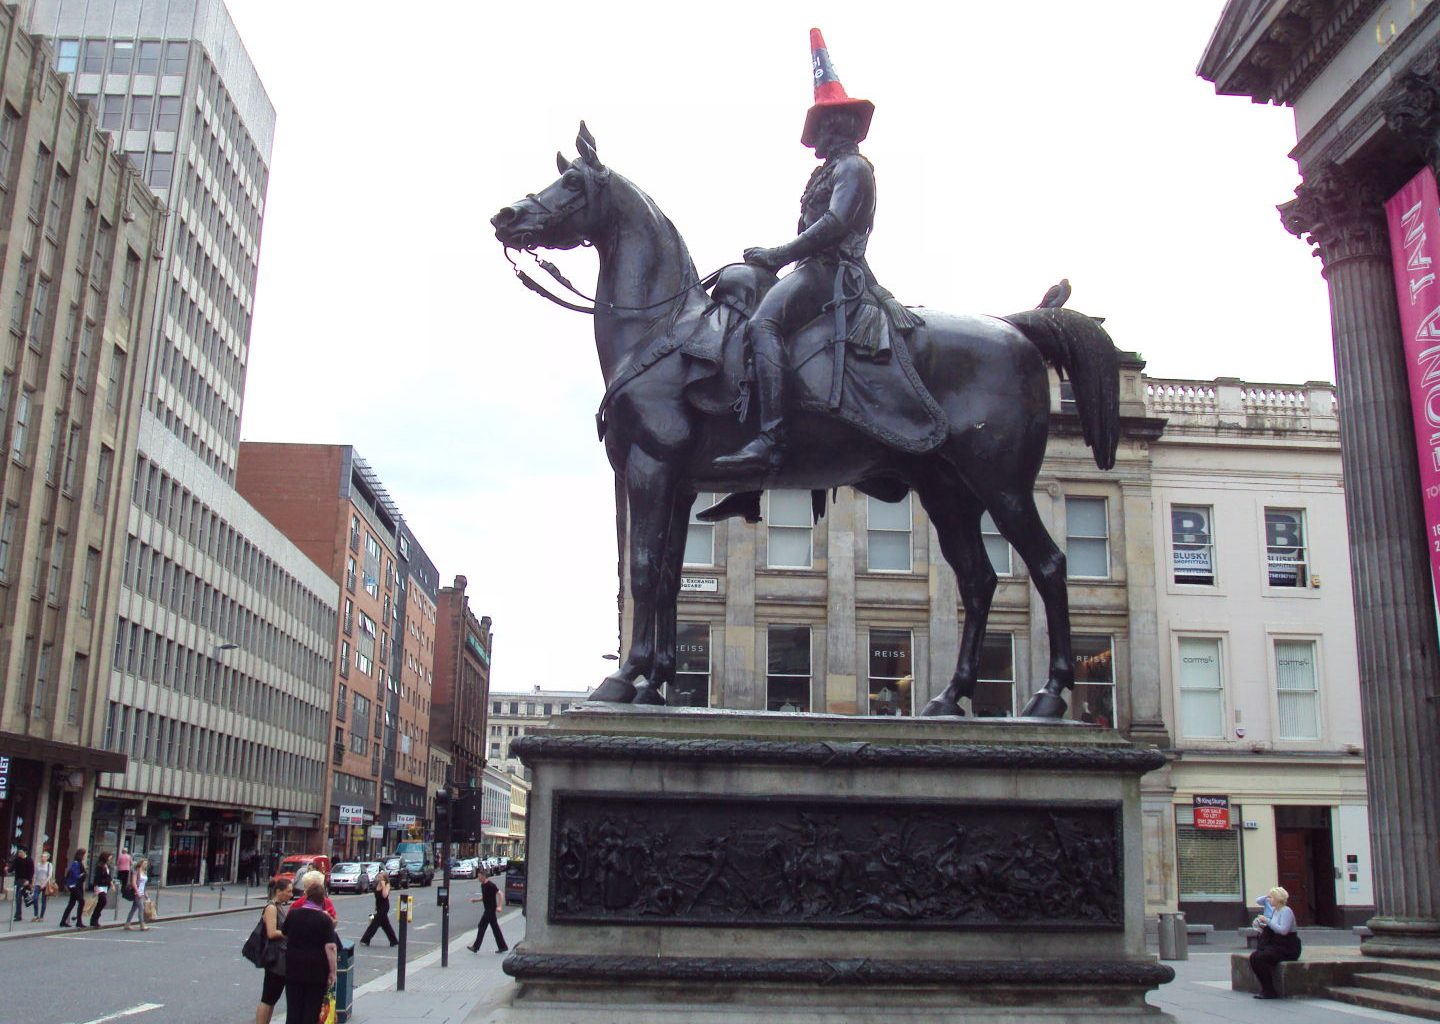 "Statue of Wellington, mounted, Glasgow - DSC06285" by Rept0n1x - Own work. Licensed under CC BY-SA 3.0 via Commons - https://commons.wikimedia.org/wiki/File:Statue_of_Wellington,_mounted,_Glasgow_-_DSC06285.JPG#/media/File:Statue_of_Wellington,_mounted,_Glasgow_-_DSC06285.JPG